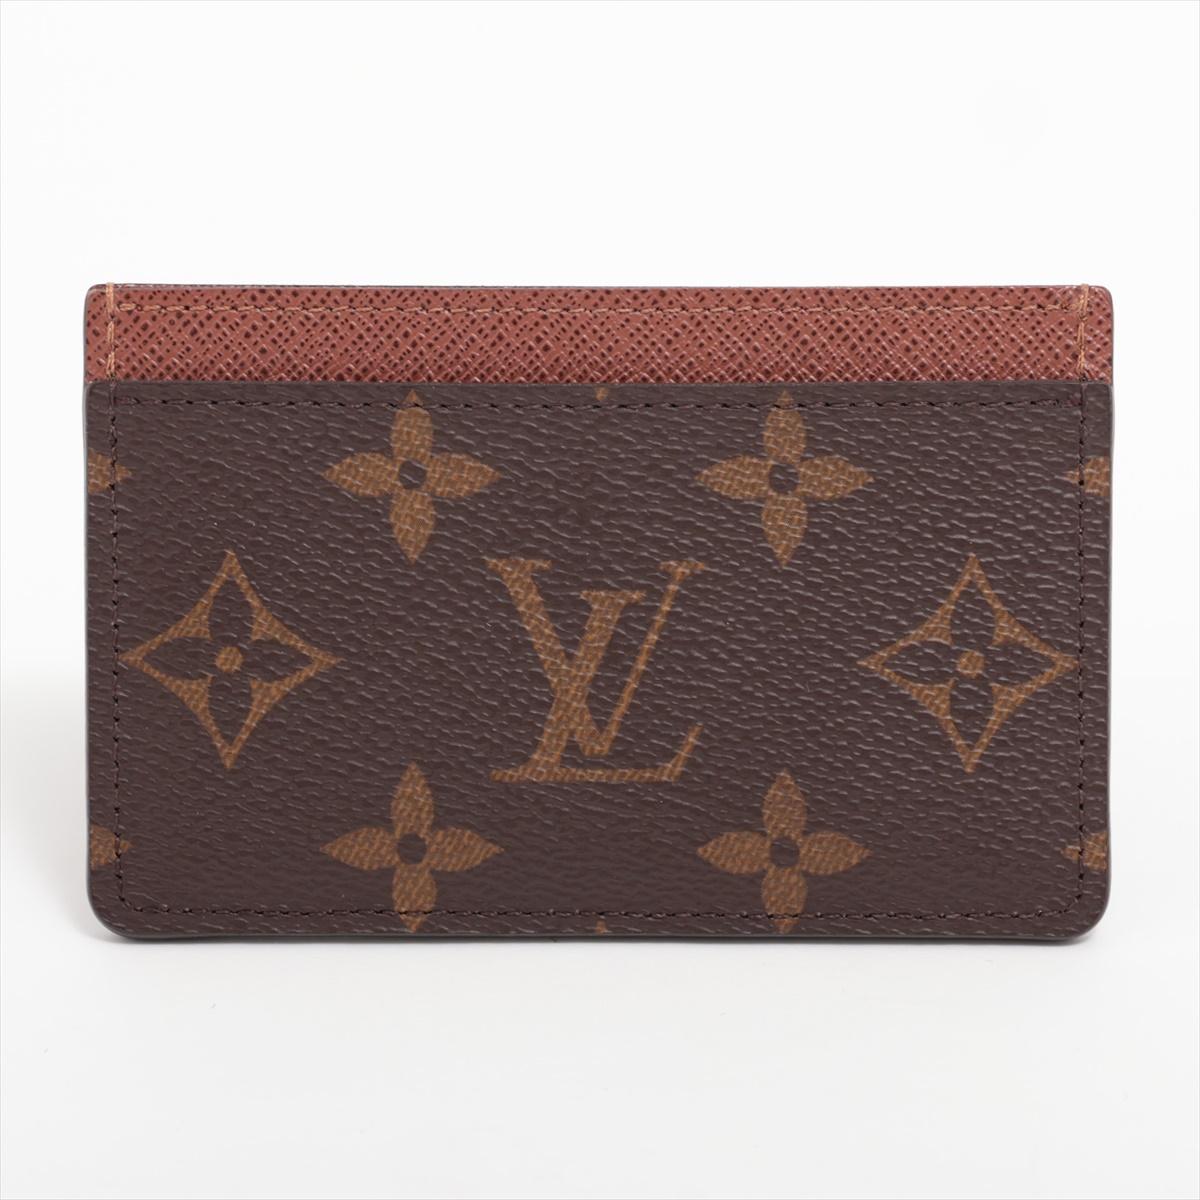 Louis Vuitton Monogram Card Case Brown In Good Condition For Sale In Indianapolis, IN